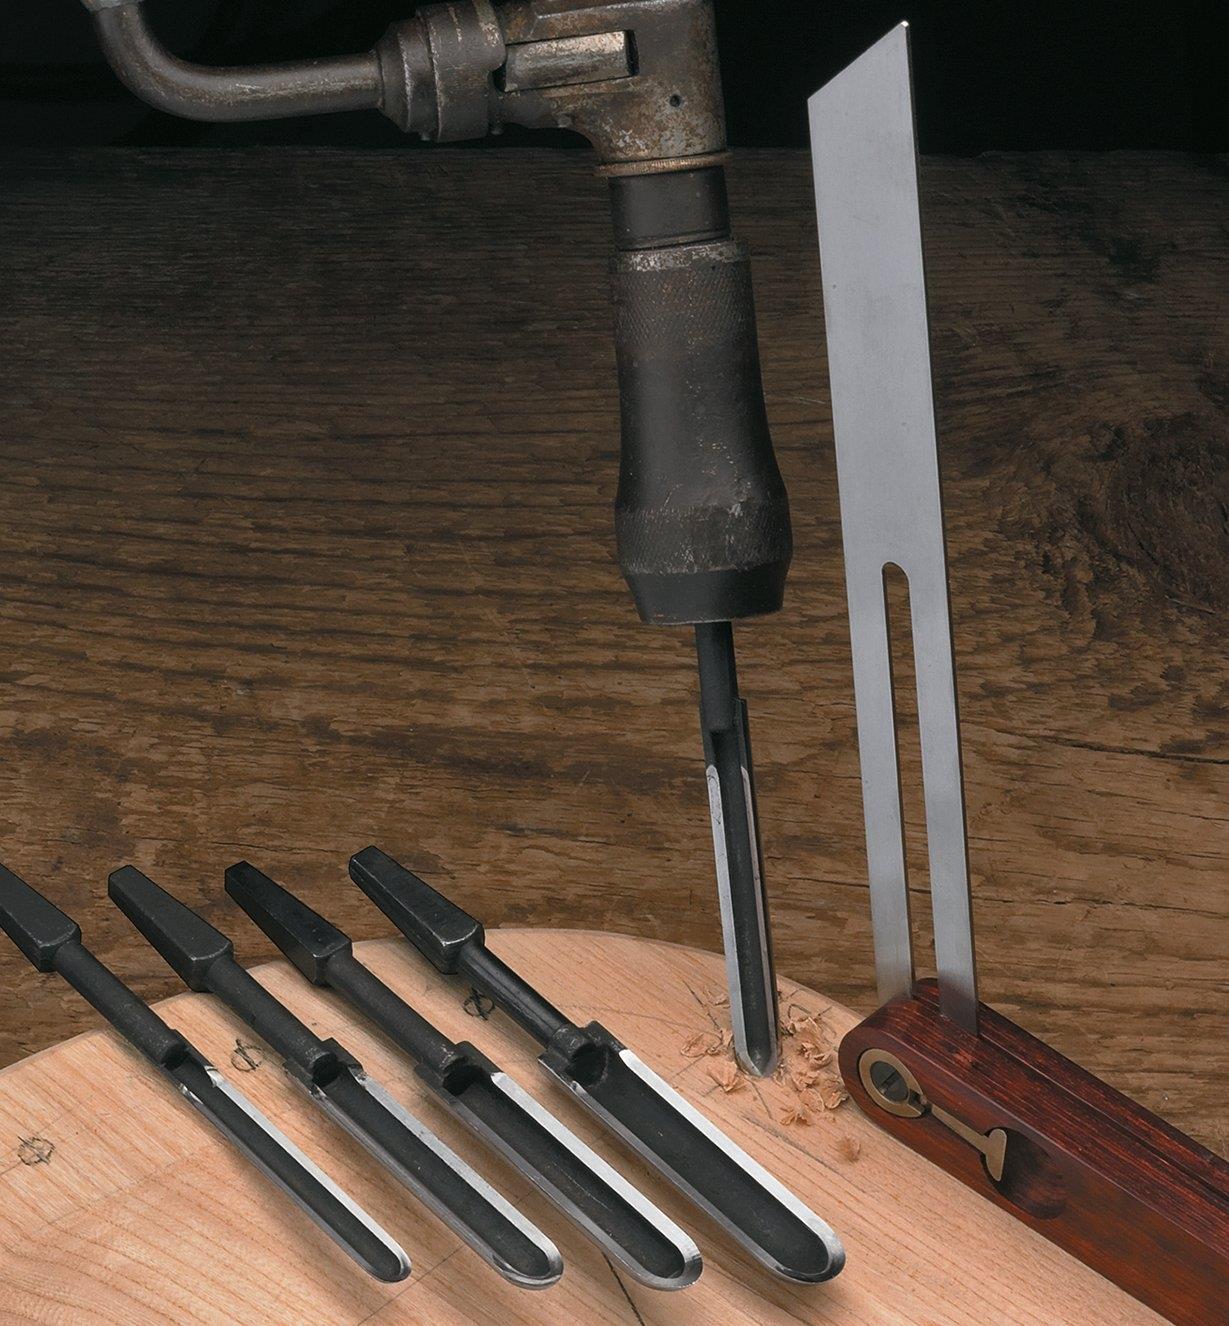 Using a spoon bit to drill into a chair seat, with a sliding bevel guiding the angle